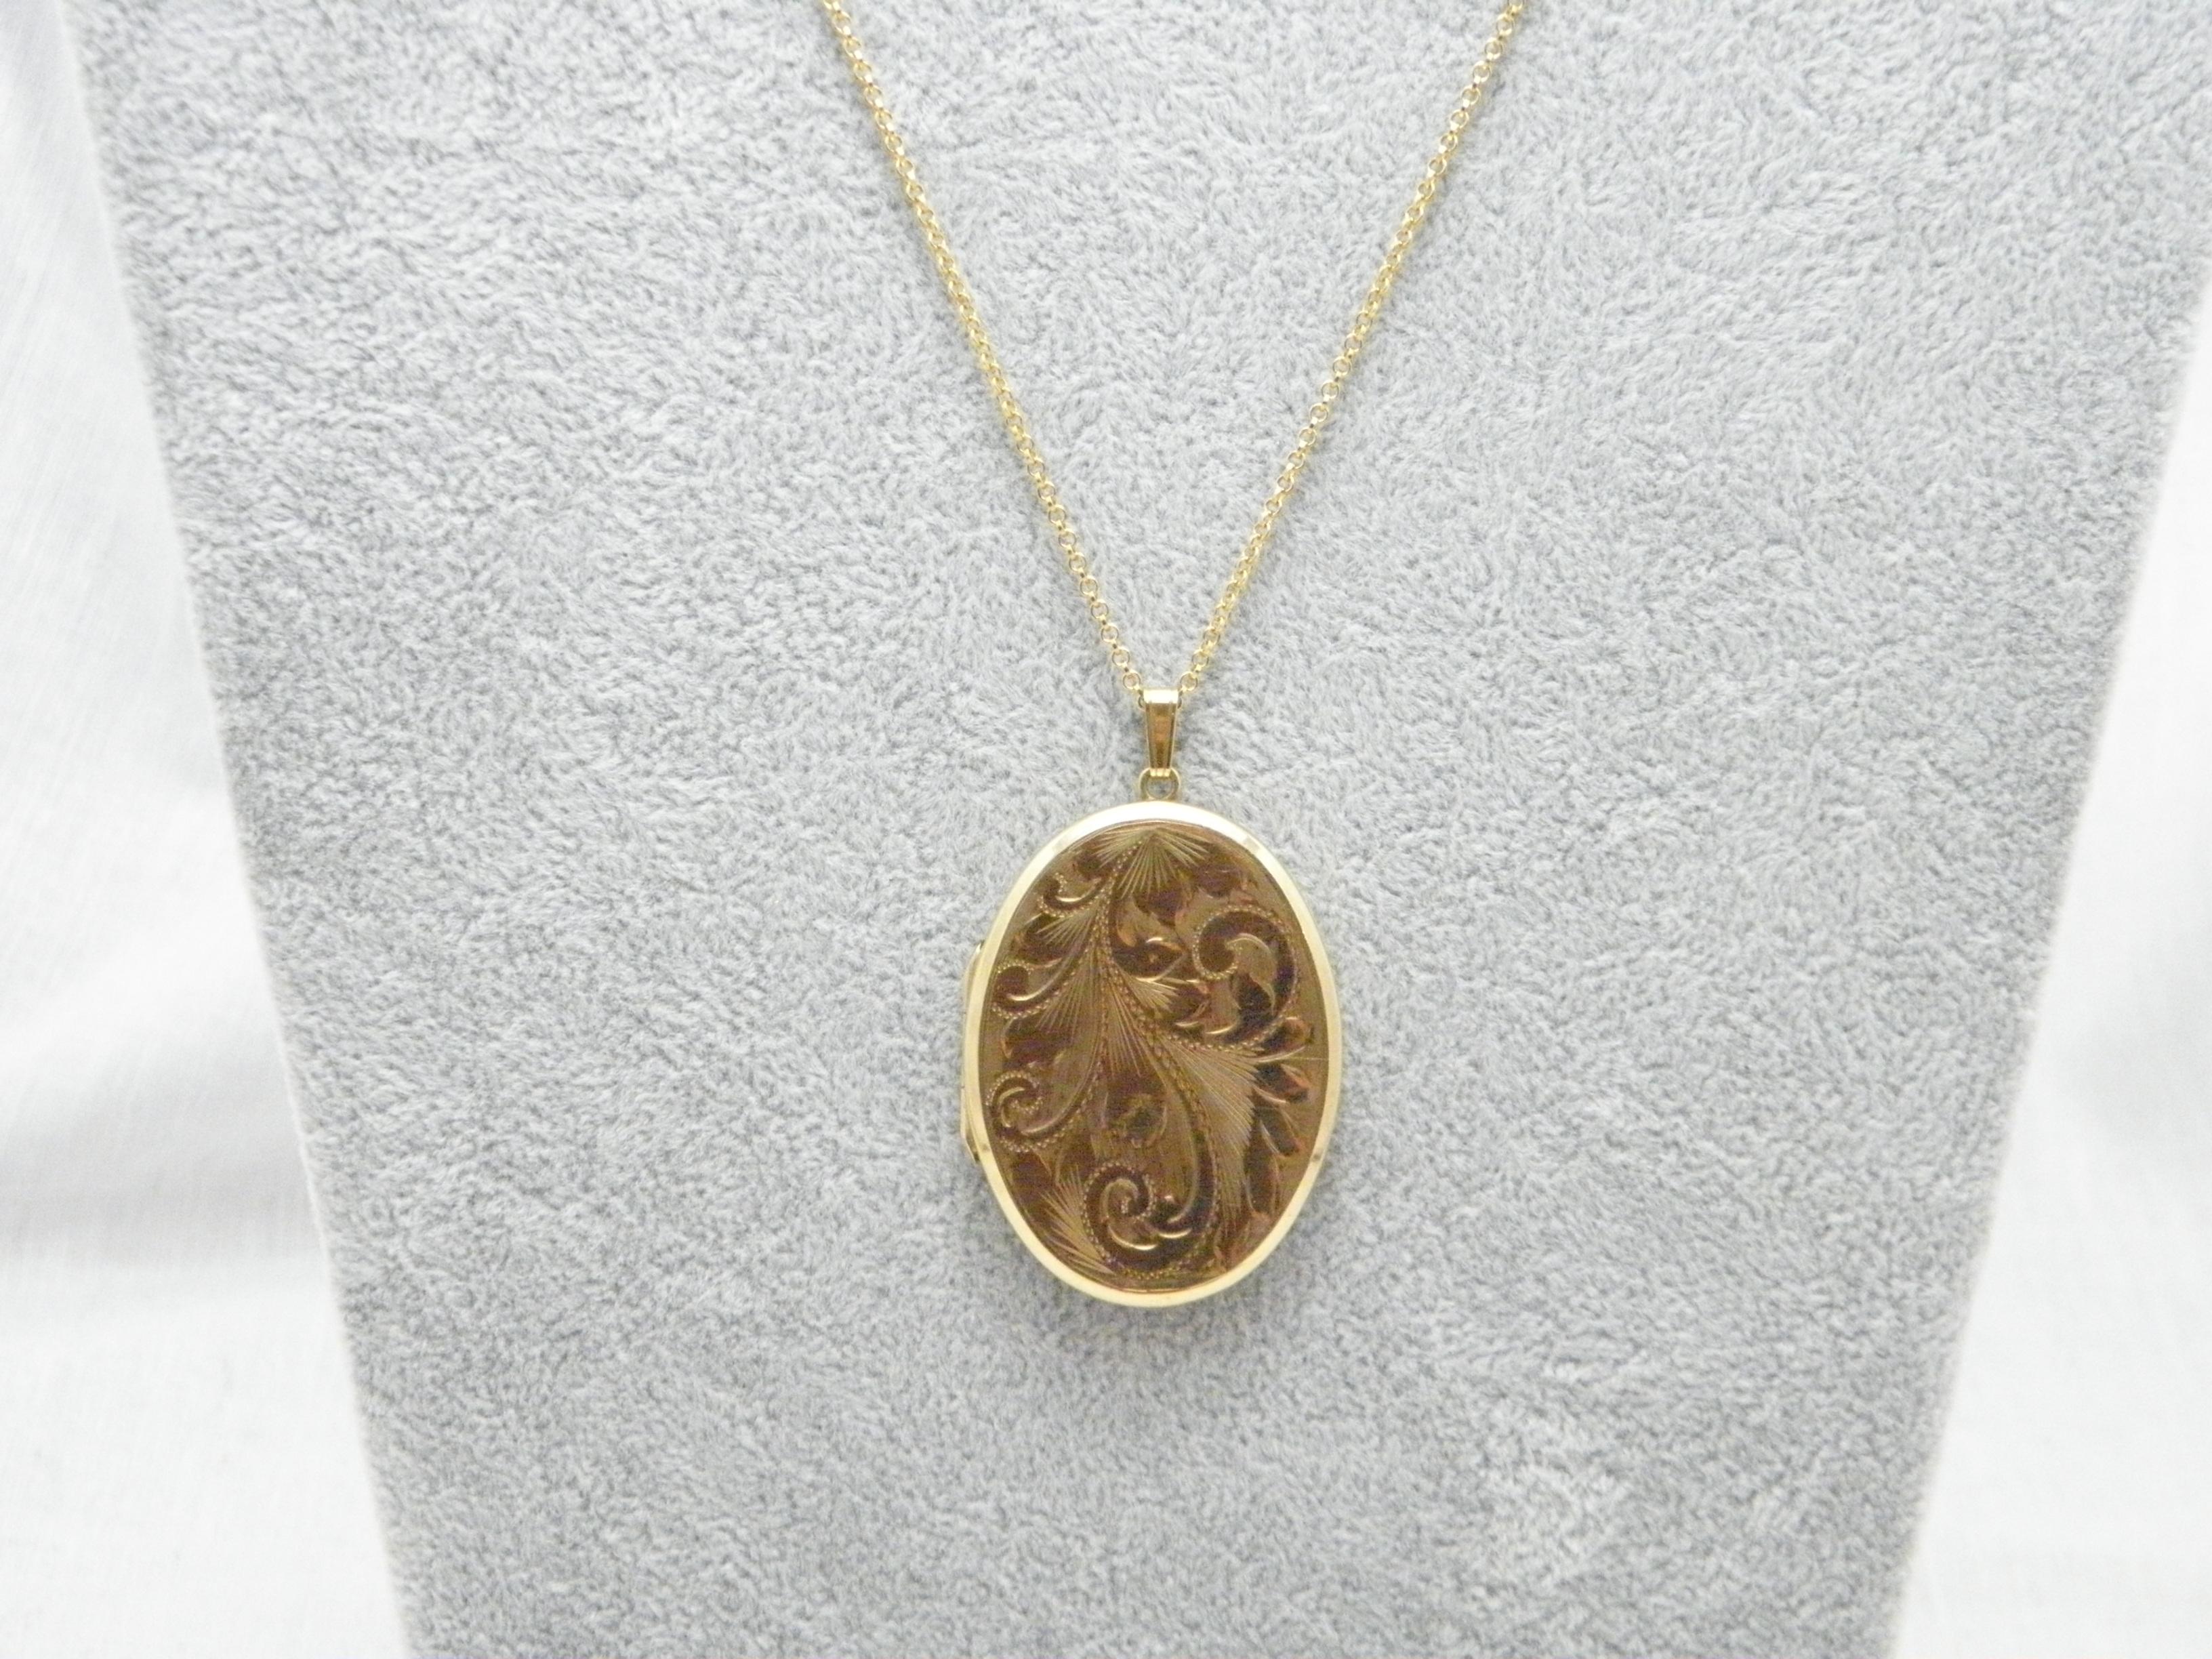 If you have landed on this page then you have an eye for beauty.

On offer is this gorgeous

9CT GOLD FLORAL DETAILED HUGE KEEPSAKE LOCKET PENDANT NECKLACE

PENDANT DESCRIPTION
DETAILS
Material: Solid 9ct (375/000) yellow gold
Style: Classic Locket